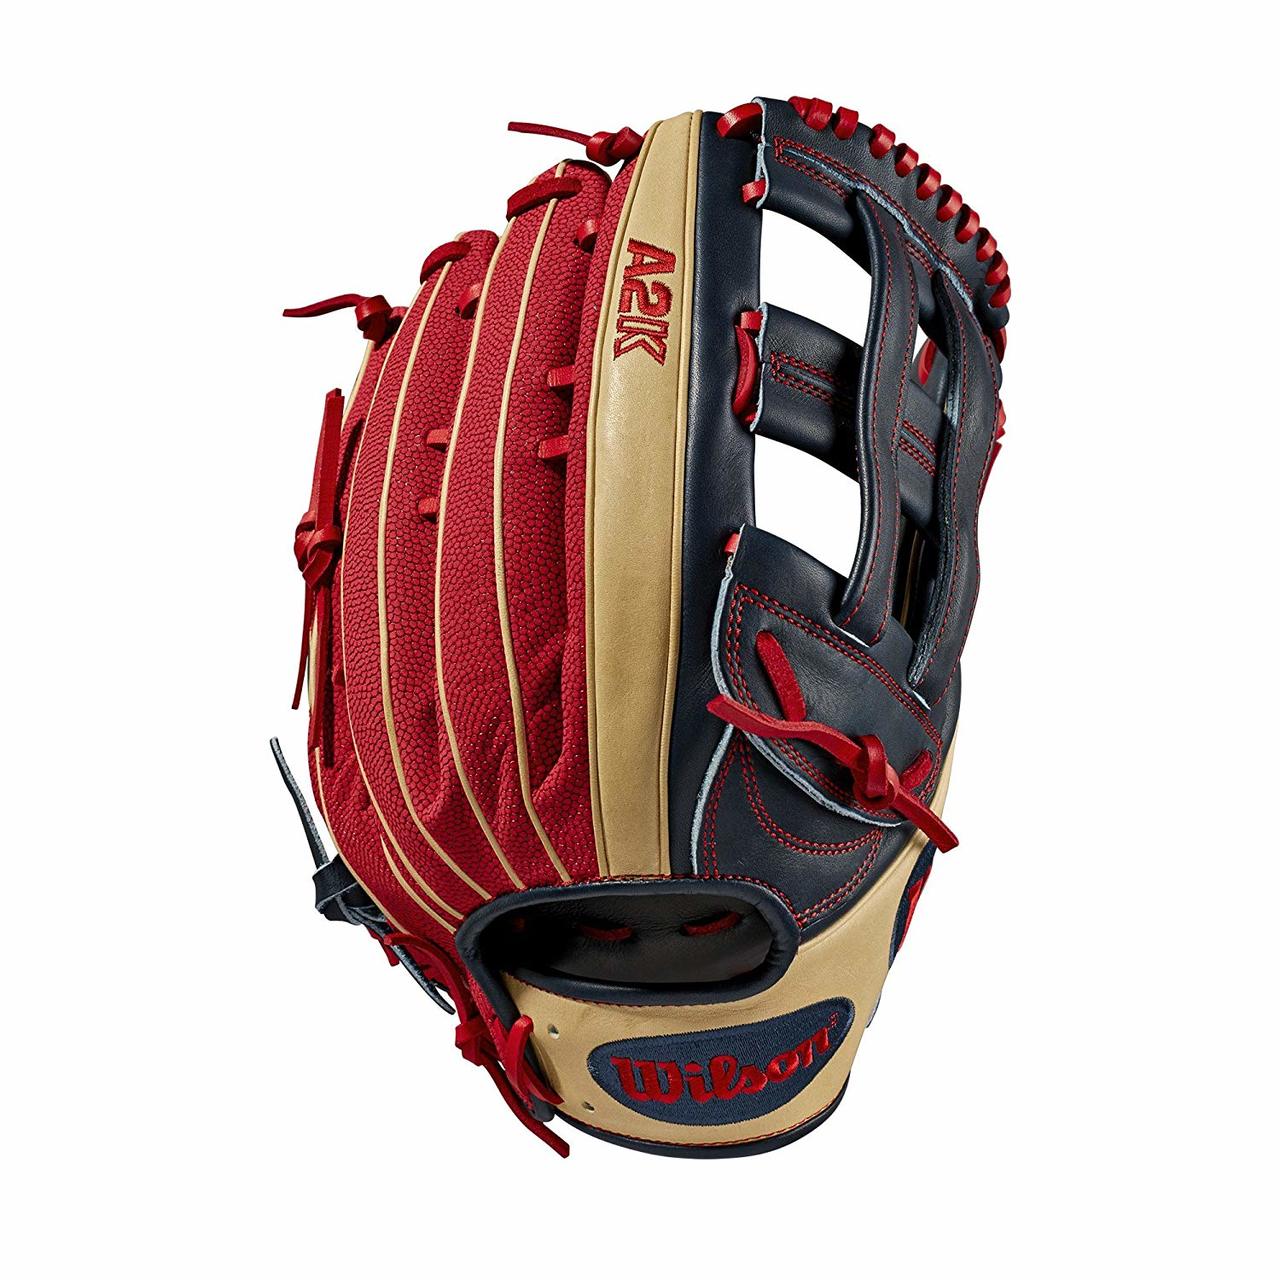 Mookie is making a name for himself in Boston, so it's only right he has a gamer to match his style. A SuperSkin A2K model in 12.75 gives him the additional length and lightweight feel he needs to chase down balls in the alley. If there's a ball in his vicinity, Mookie and his glove will make the play. 12.75 Game Model for Mookie Betts Dual Post Web Navy and Blonde Pro Stock Select Leather, chosen for its consistency and flawlessness Red SuperSkin™, twice as strong as regular leather, but half the weight Available in right- and left-hand throw Rolled Dual Welting™ for long-lasting shape and quicker break-in Double Palm Construction, providing maximum pocket stability 3x More Shaping, to help reduce break-in time.